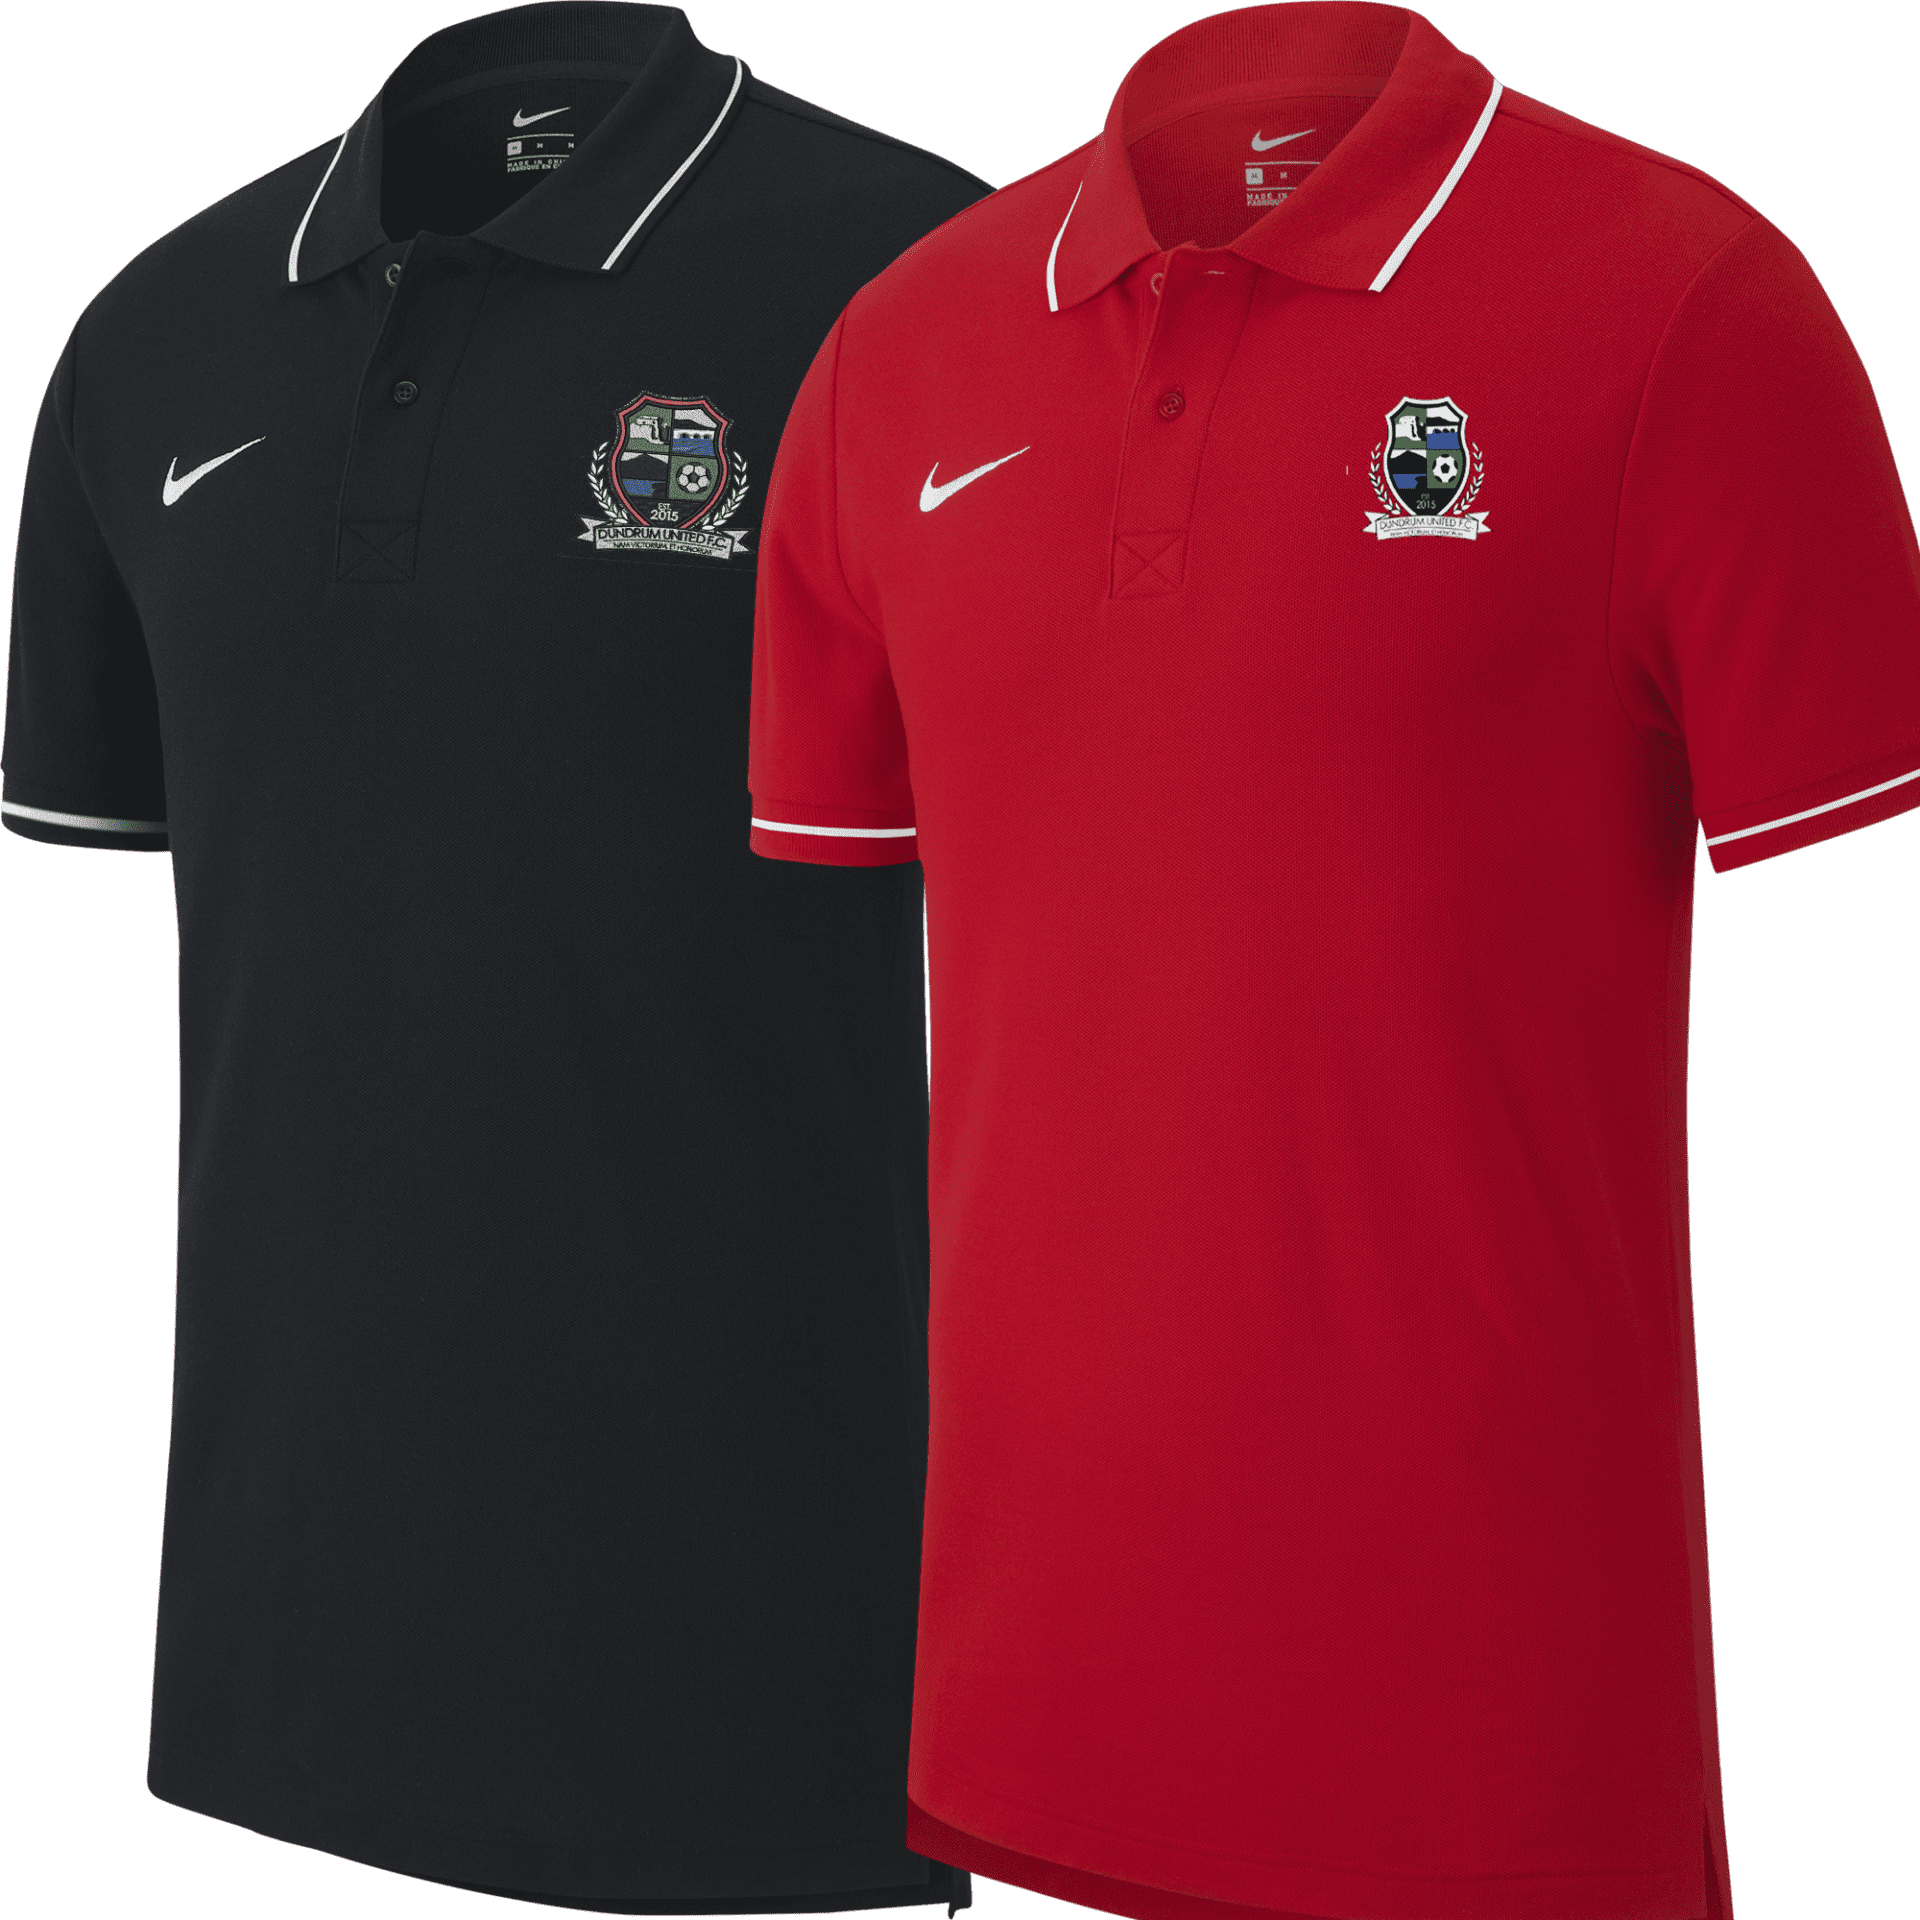 dundrum fc club 19 polo 34117 1 p